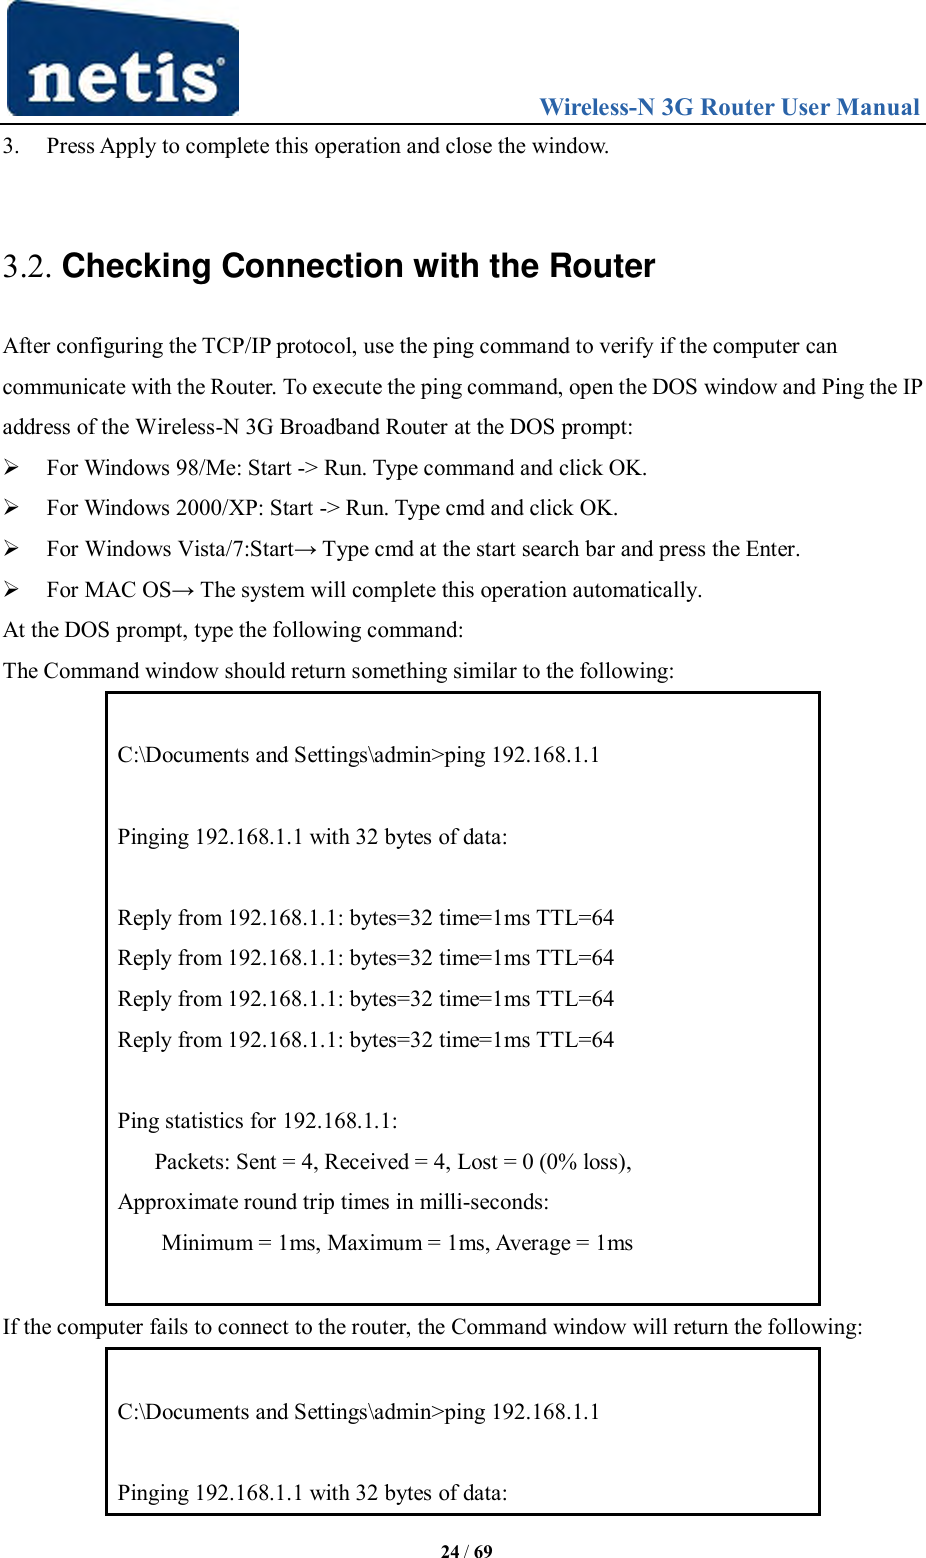                                 Wireless-N 3G Router User Manual  24 / 69 3. Press Apply to complete this operation and close the window.    3.2. Checking Connection with the Router After configuring the TCP/IP protocol, use the ping command to verify if the computer can communicate with the Router. To execute the ping command, open the DOS window and Ping the IP address of the Wireless-N 3G Broadband Router at the DOS prompt:  For Windows 98/Me: Start -&gt; Run. Type command and click OK.  For Windows 2000/XP: Start -&gt; Run. Type cmd and click OK.  For Windows Vista/7:Start→ Type cmd at the start search bar and press the Enter.  For MAC OS→ The system will complete this operation automatically. At the DOS prompt, type the following command: The Command window should return something similar to the following:  C:\Documents and Settings\admin&gt;ping 192.168.1.1  Pinging 192.168.1.1 with 32 bytes of data:  Reply from 192.168.1.1: bytes=32 time=1ms TTL=64 Reply from 192.168.1.1: bytes=32 time=1ms TTL=64 Reply from 192.168.1.1: bytes=32 time=1ms TTL=64 Reply from 192.168.1.1: bytes=32 time=1ms TTL=64  Ping statistics for 192.168.1.1:      Packets: Sent = 4, Received = 4, Lost = 0 (0% loss), Approximate round trip times in milli-seconds: Minimum = 1ms, Maximum = 1ms, Average = 1ms  If the computer fails to connect to the router, the Command window will return the following:  C:\Documents and Settings\admin&gt;ping 192.168.1.1  Pinging 192.168.1.1 with 32 bytes of data: 